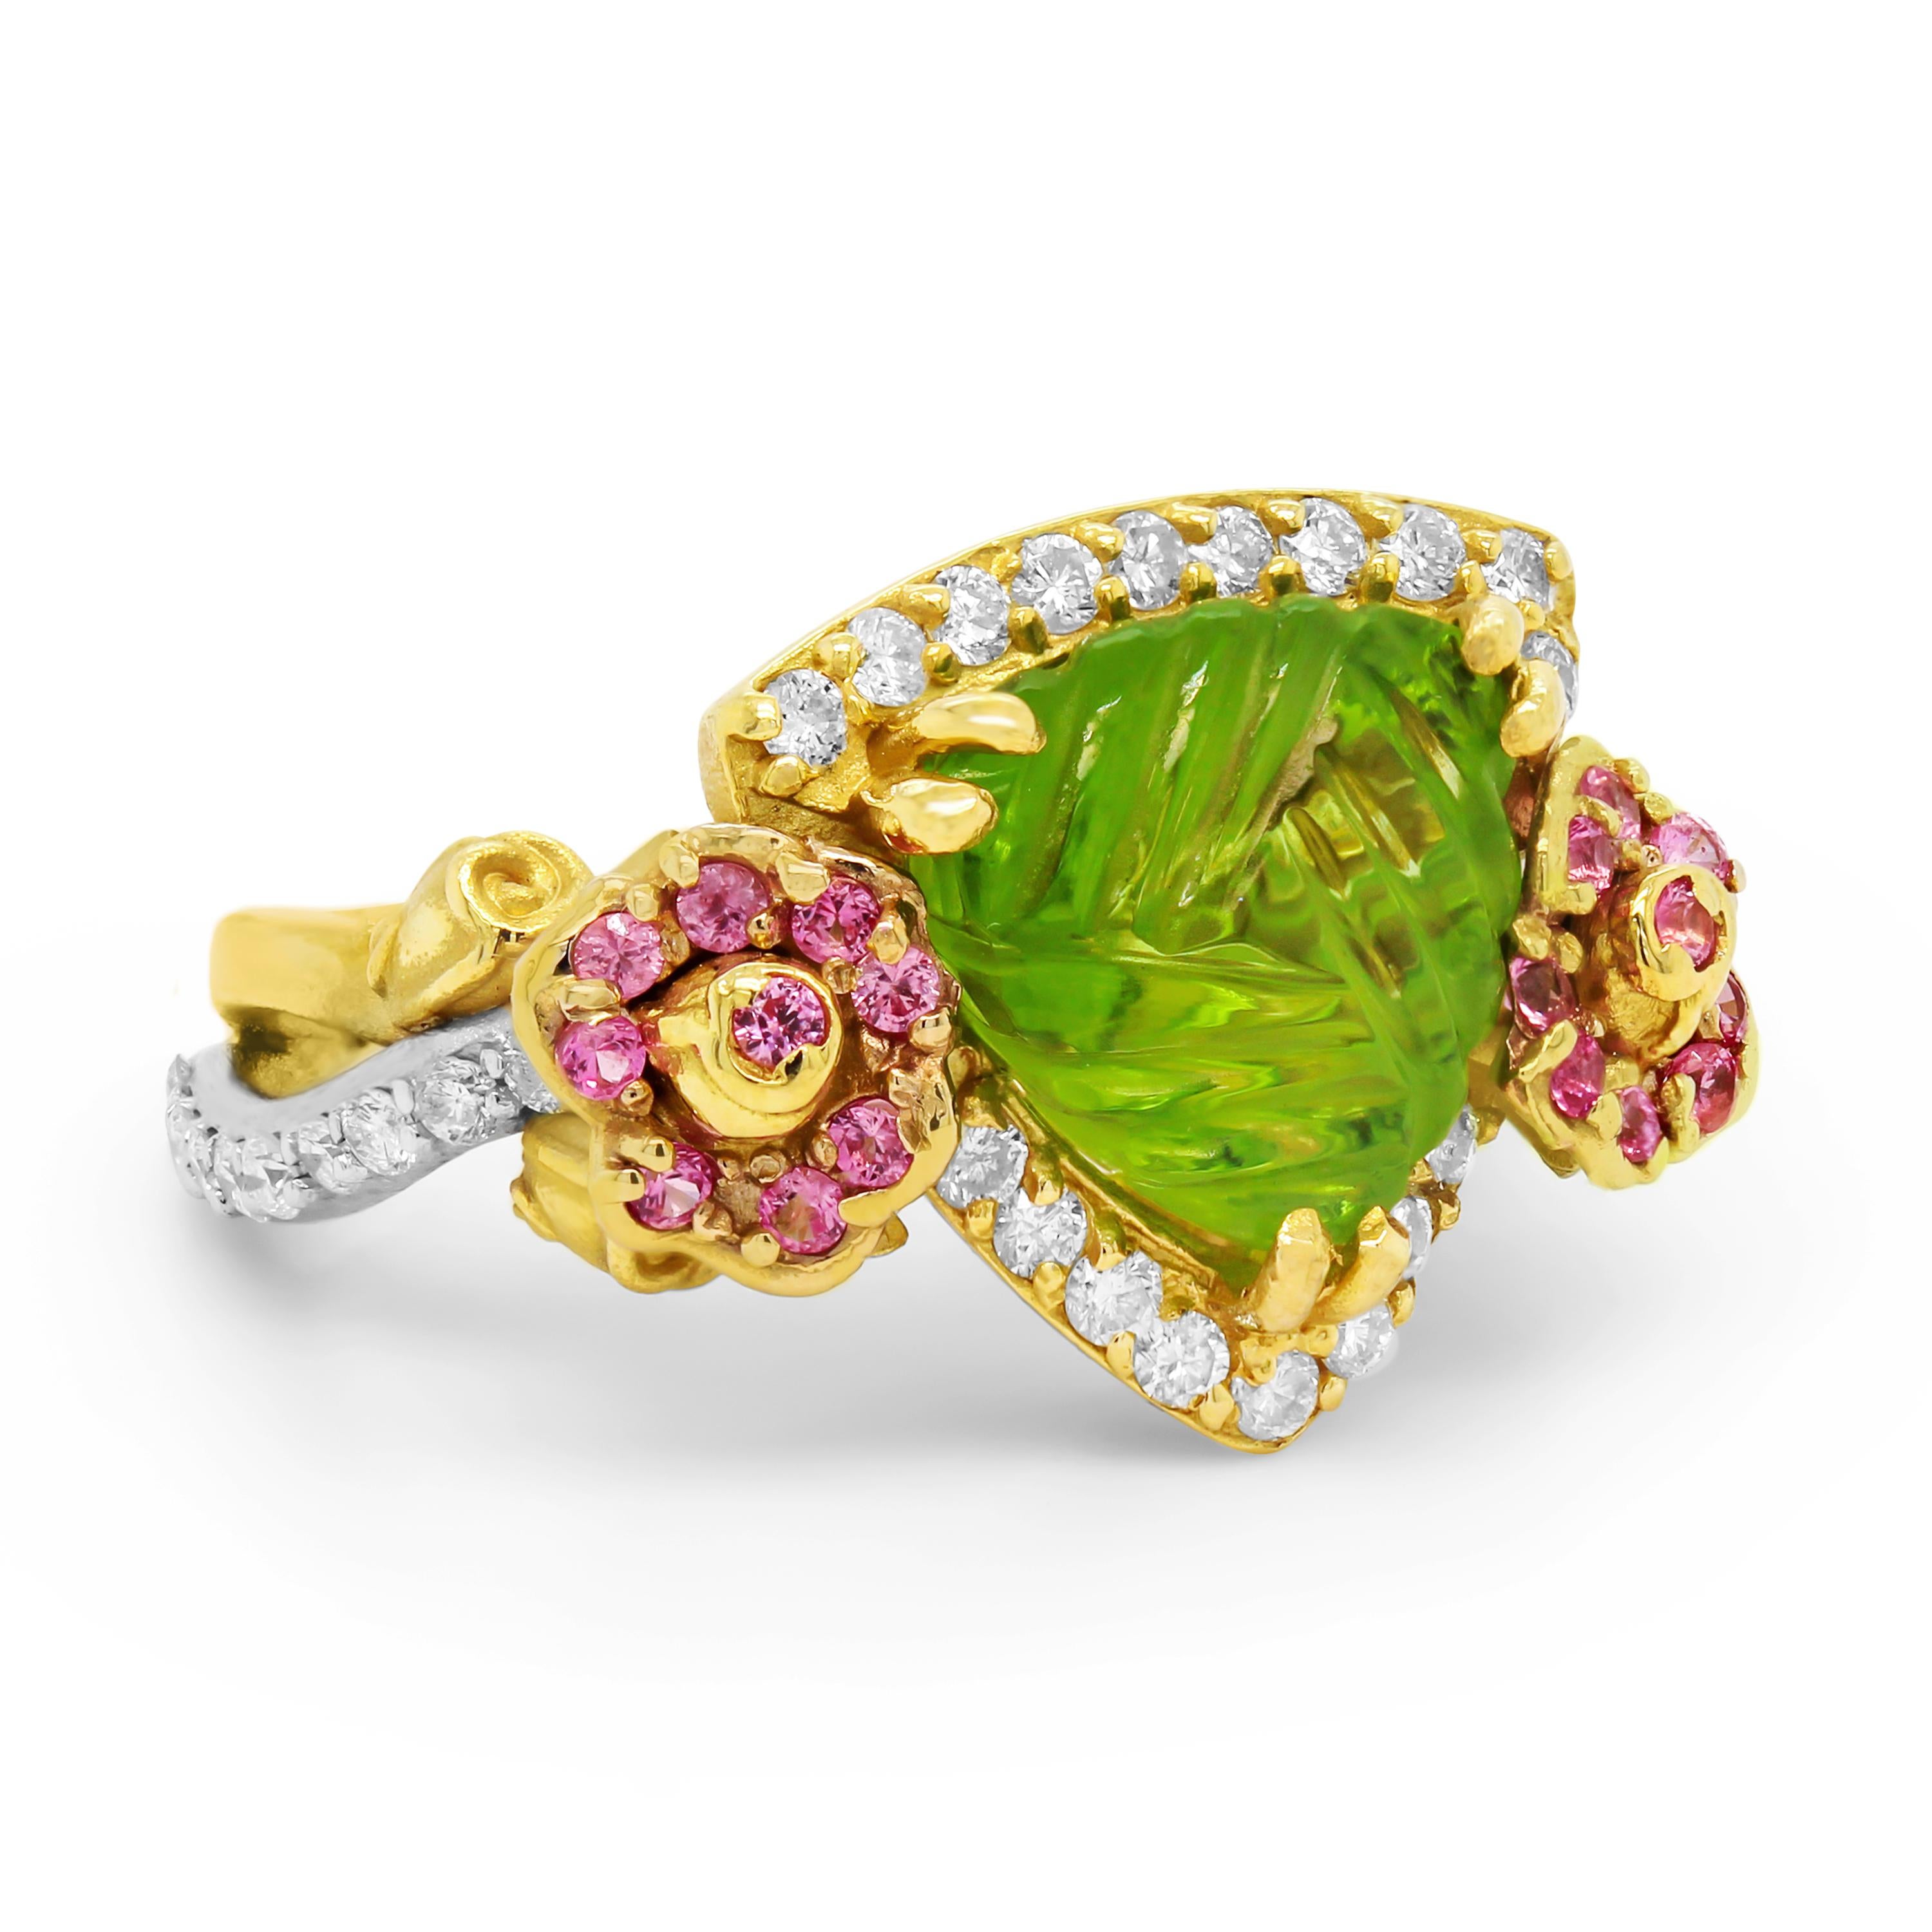 Stambolian 18K Two Tone Gold Floral Ring with Trillion-cut, carved Peridot center with Pink Sapphires and Diamonds

This masterpiece by Stambolian features two roses are on each side of the ring band and a special carved, trillion Peridot center